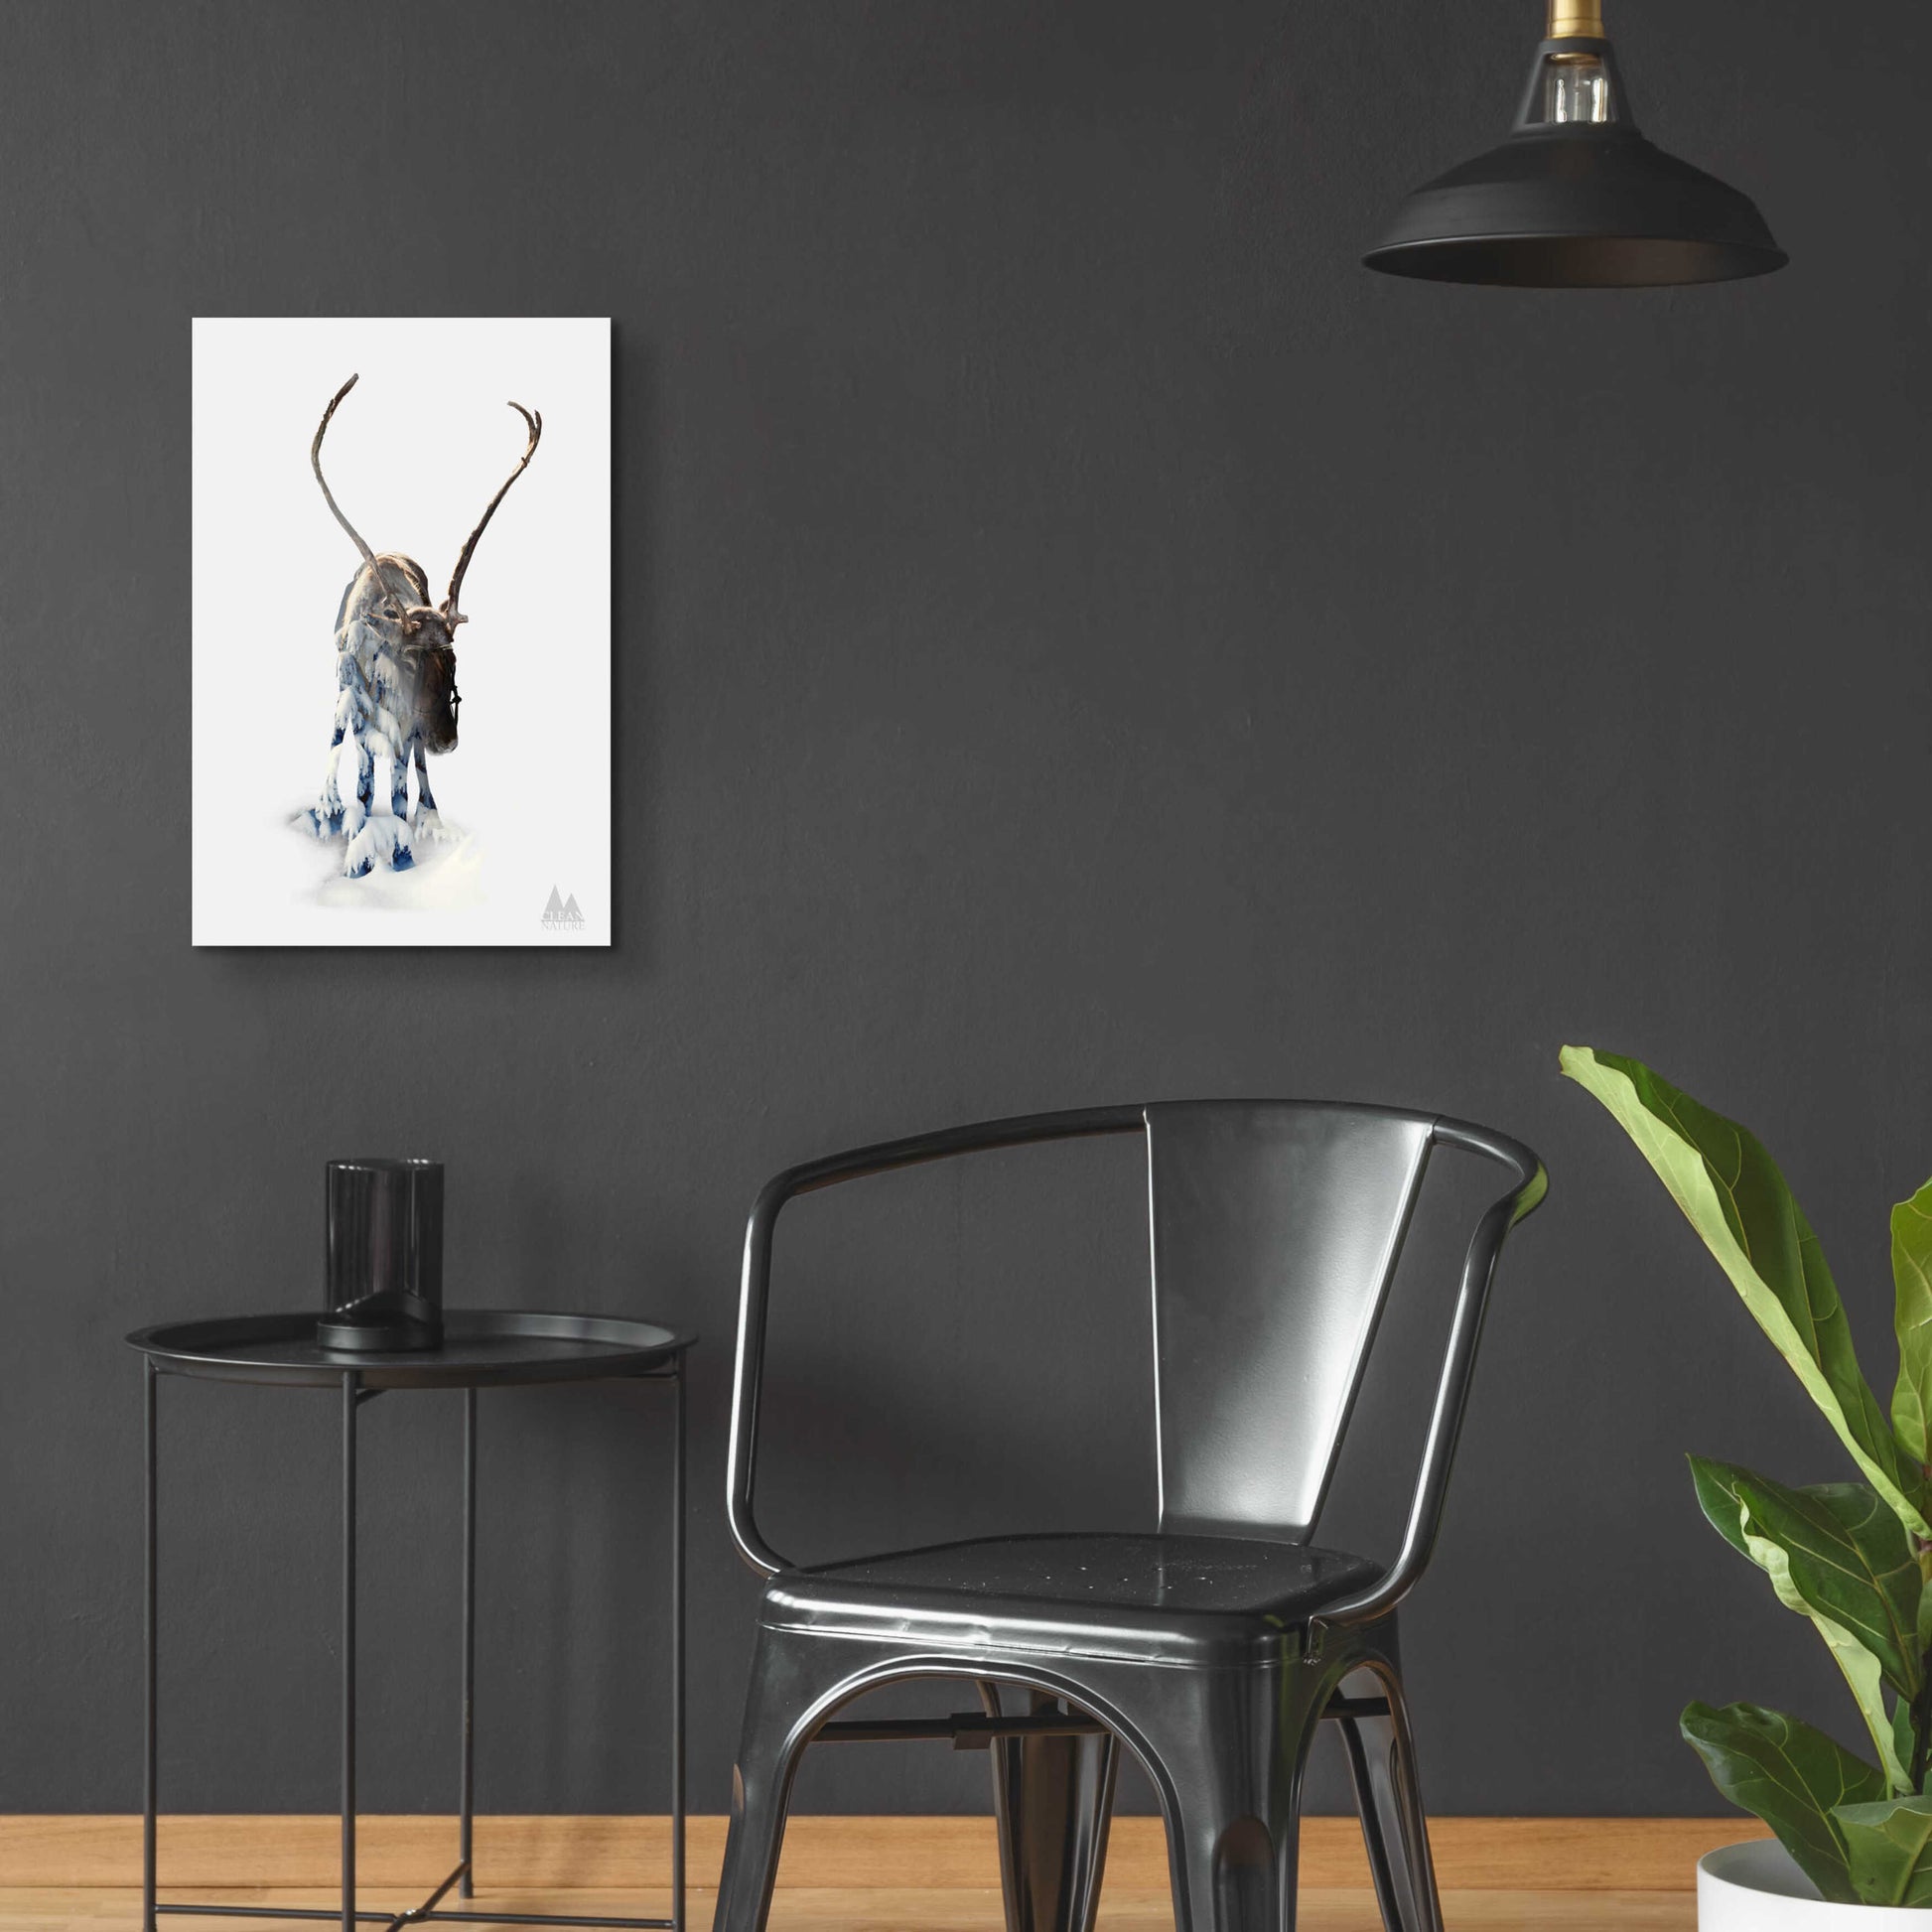 Epic Art 'Moose' by Clean Nature, Acrylic Glass Wall Art,16x24